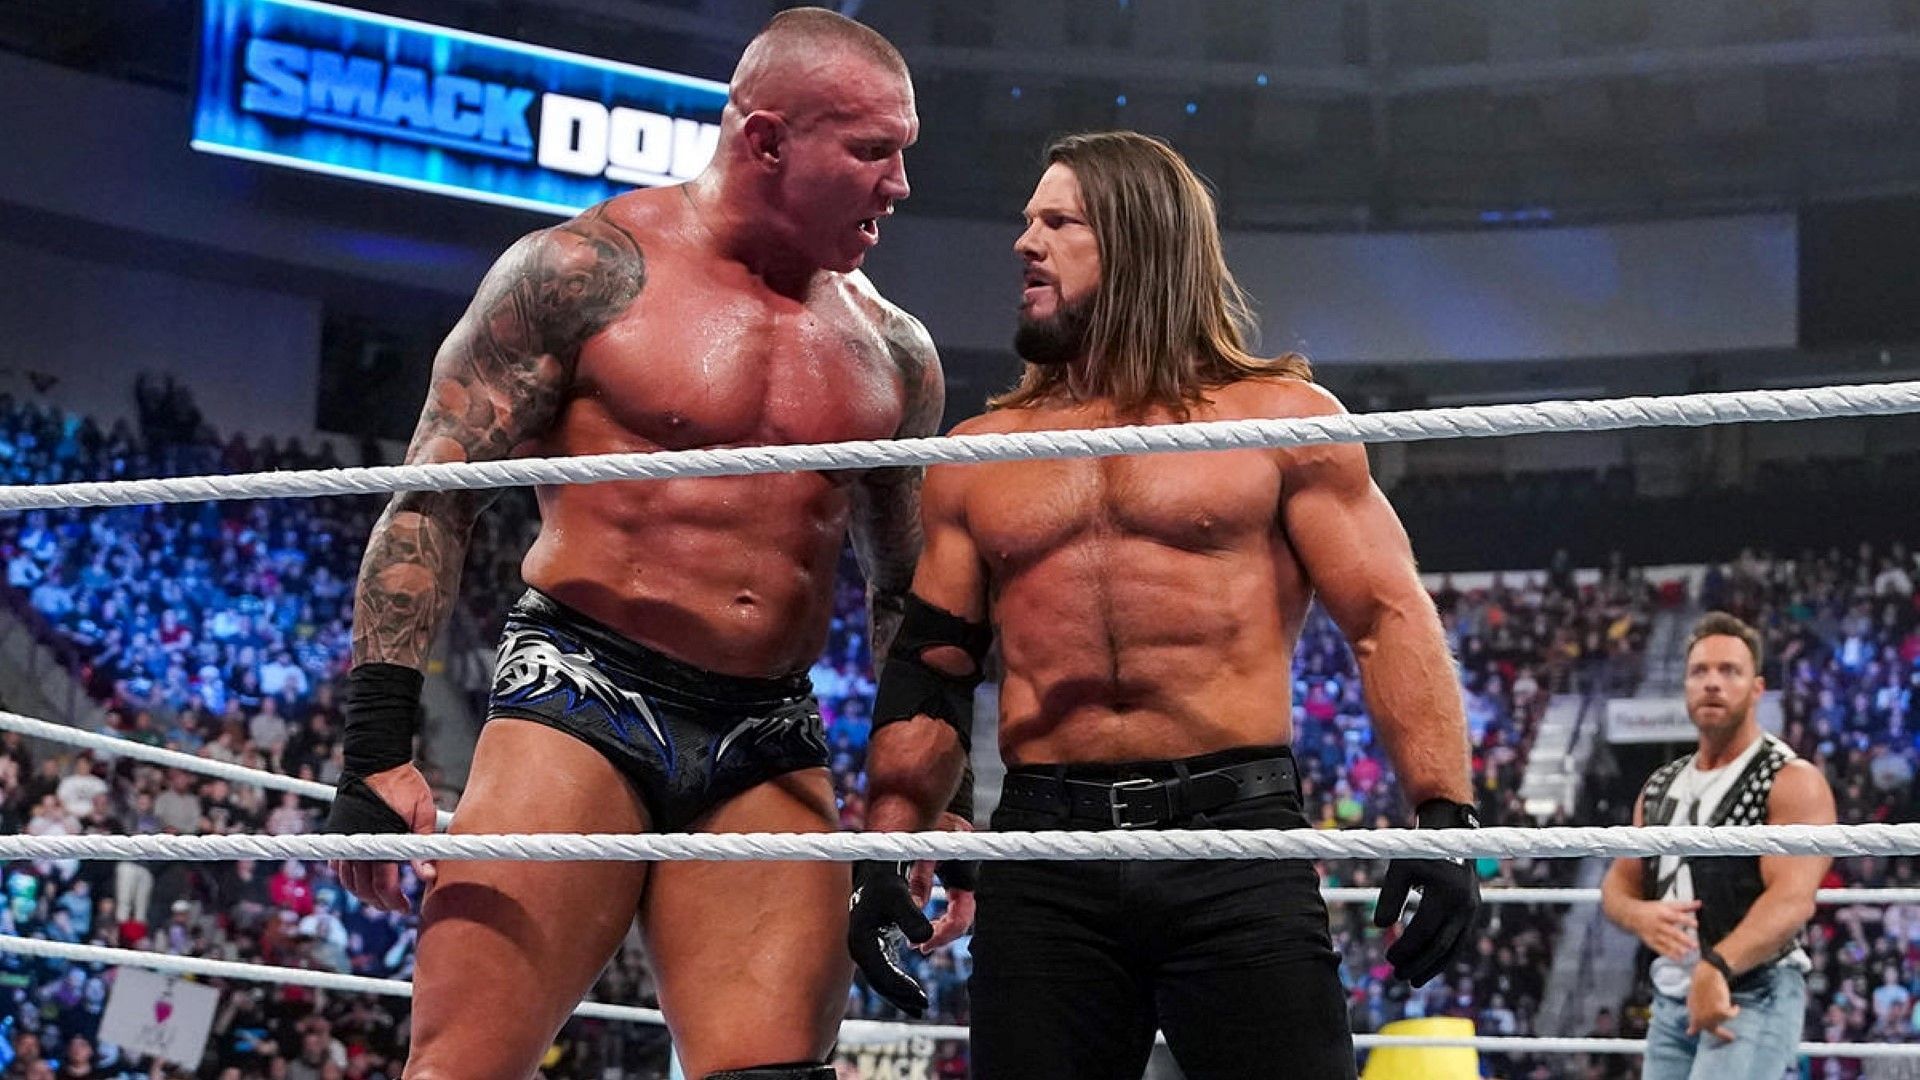 Randy Orton and AJ Styles on WWE SmackDown